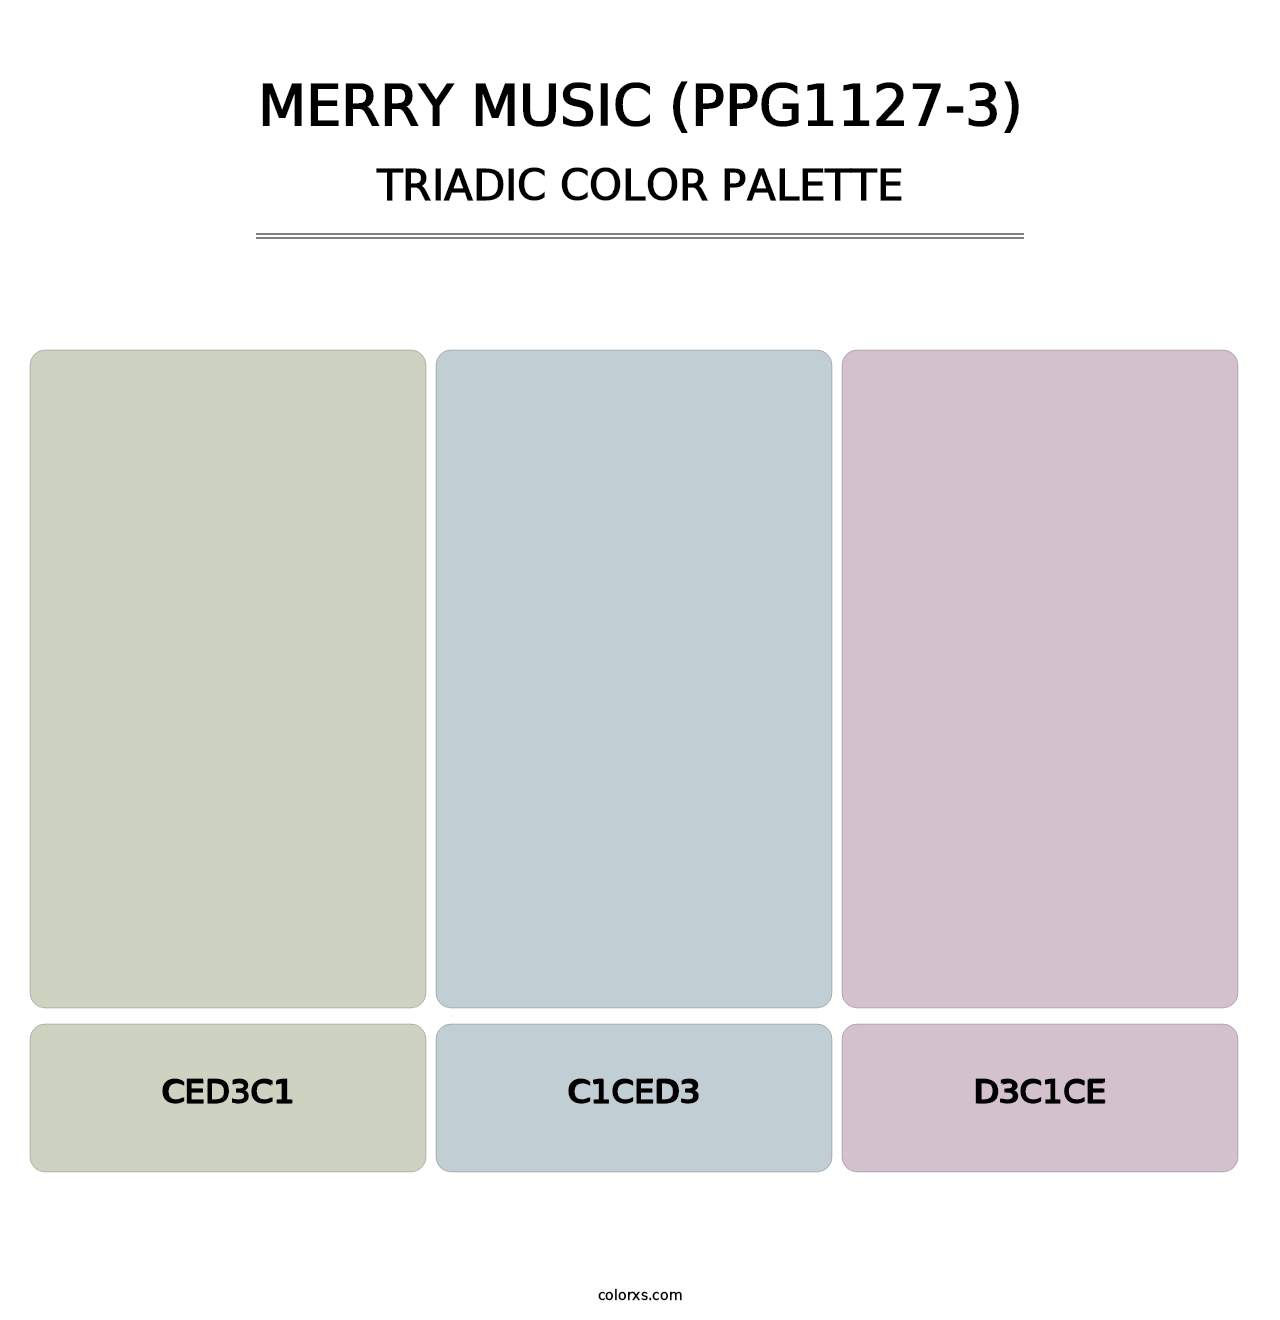 Merry Music (PPG1127-3) - Triadic Color Palette